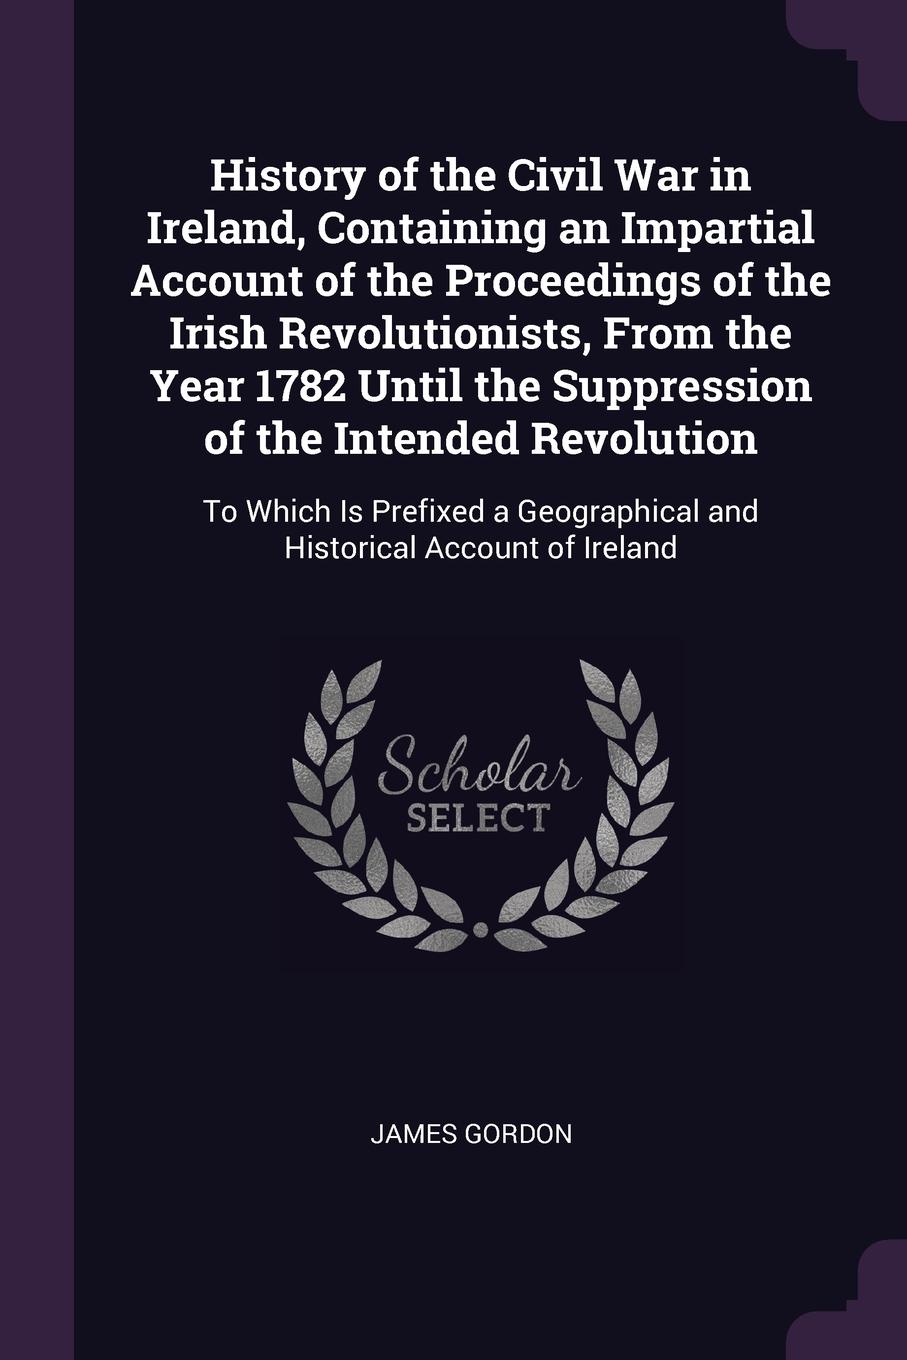 History of the Civil War in Ireland, Containing an Impartial Account of the Proceedings of the Irish Revolutionists, From the Year 1782 Until the Suppression of the Intended Revolution. To Which Is Prefixed a Geographical and Historical Account of...